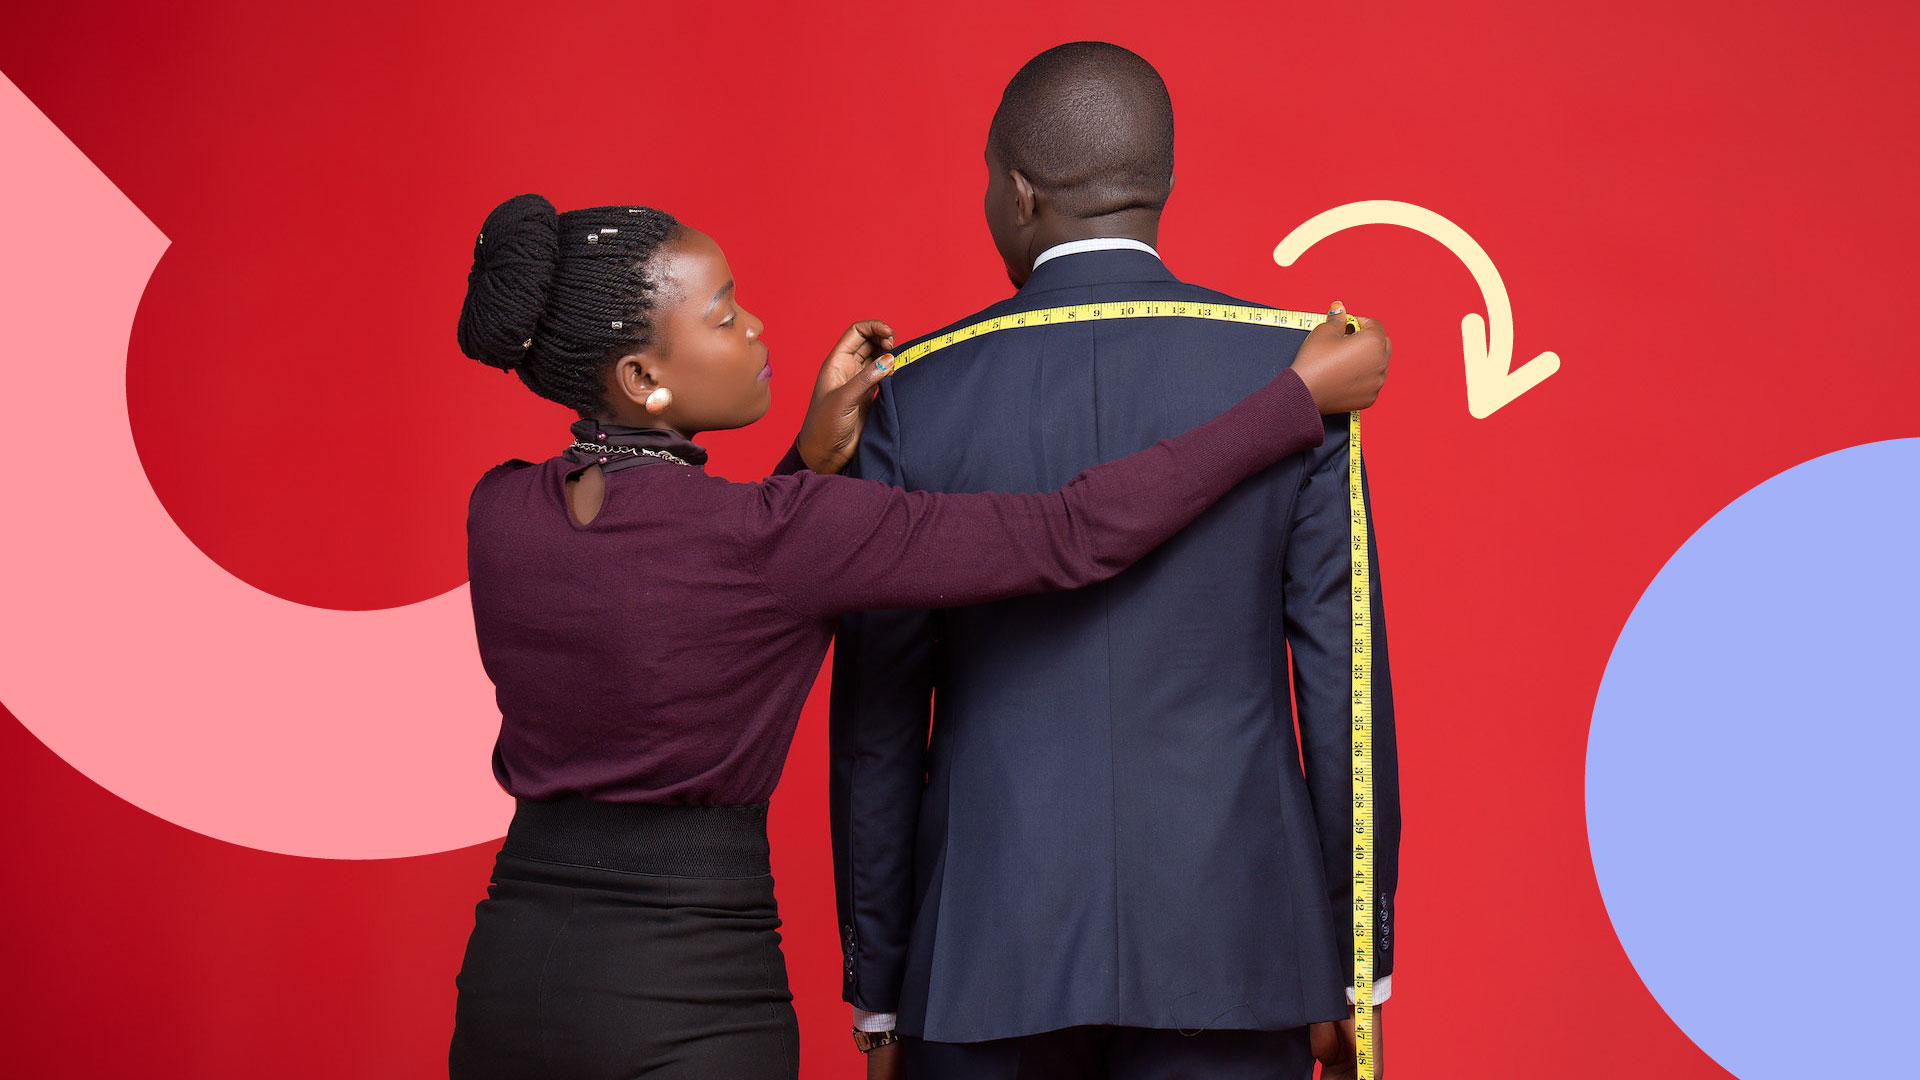 A woman seamstress measuring the width of a man's shoulders in order to personalise the fit of his suit.